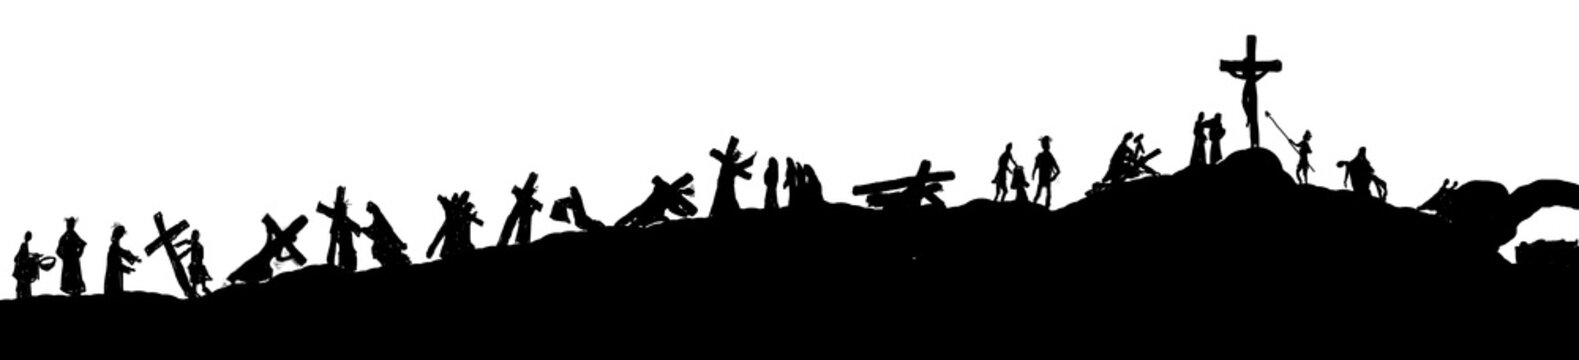 Way of the cross or stations of the cross silhouettes of Jesus Christ carrying his cross on Calvary hill. Abstract religious Lent illustration.